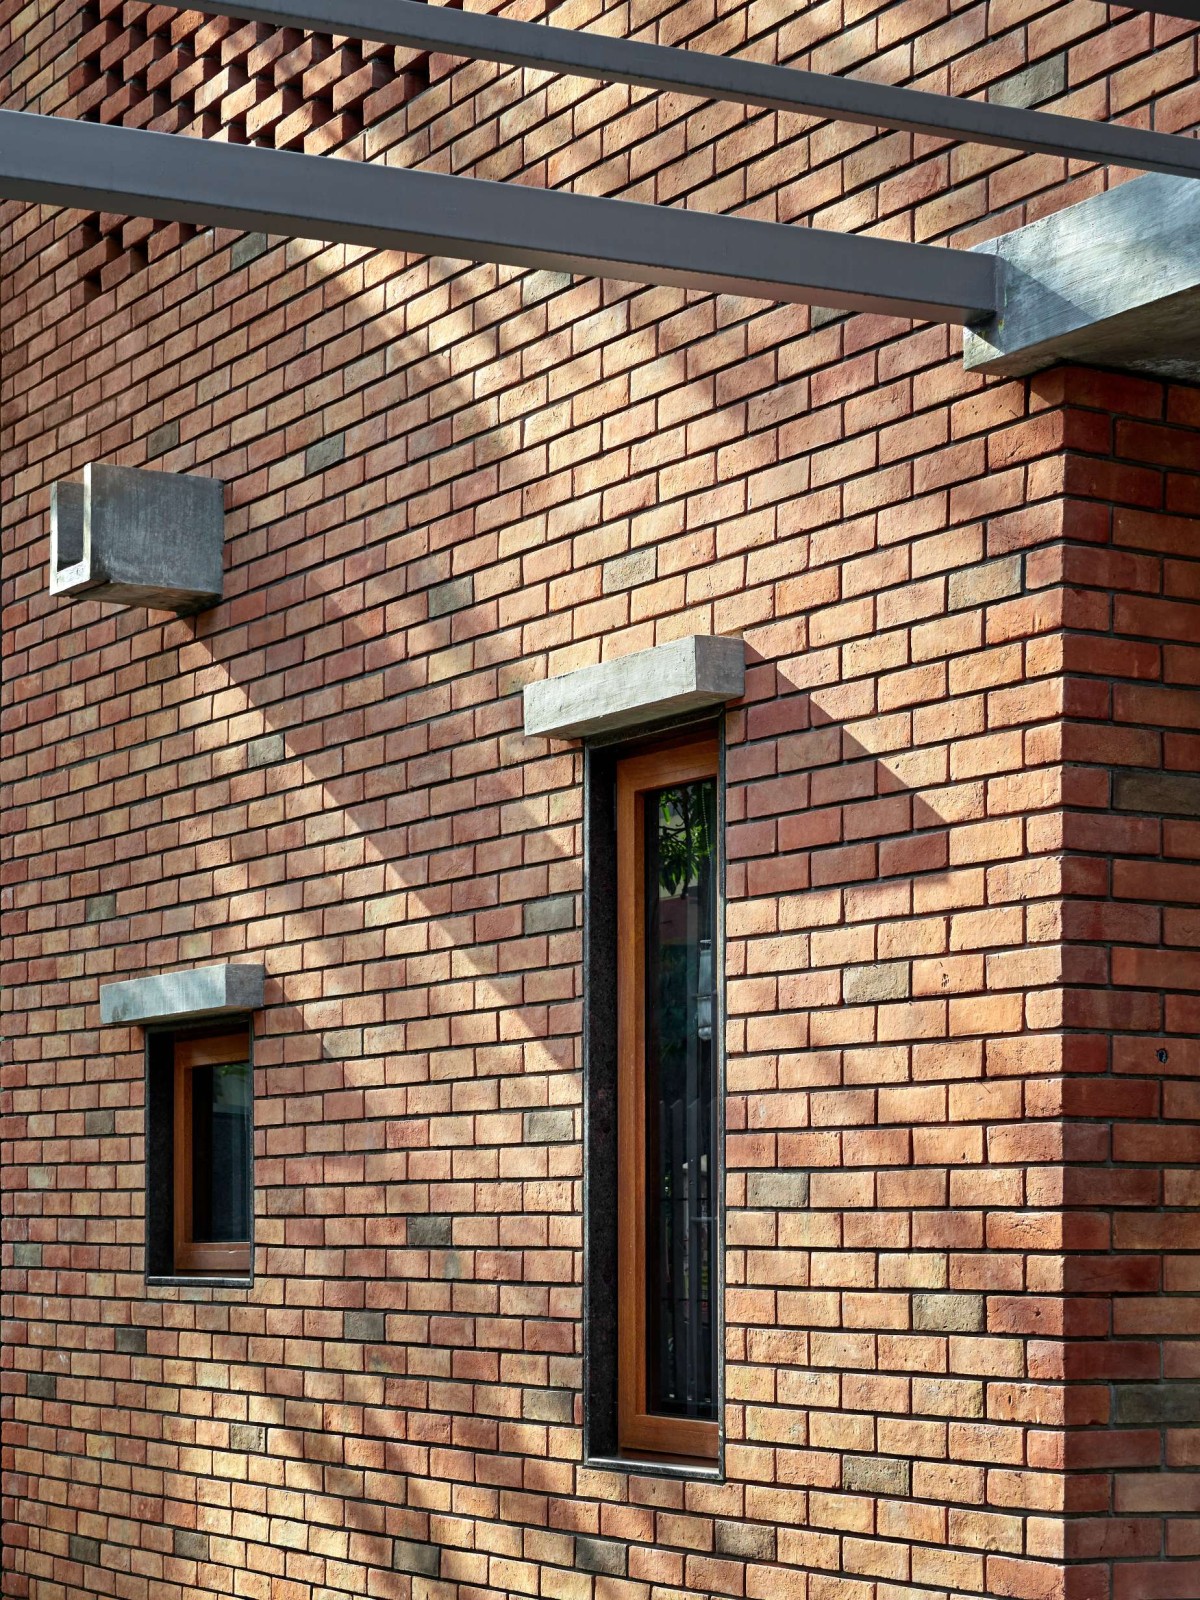 Water Spout of The Brick Abode by Alok Kothari Architects